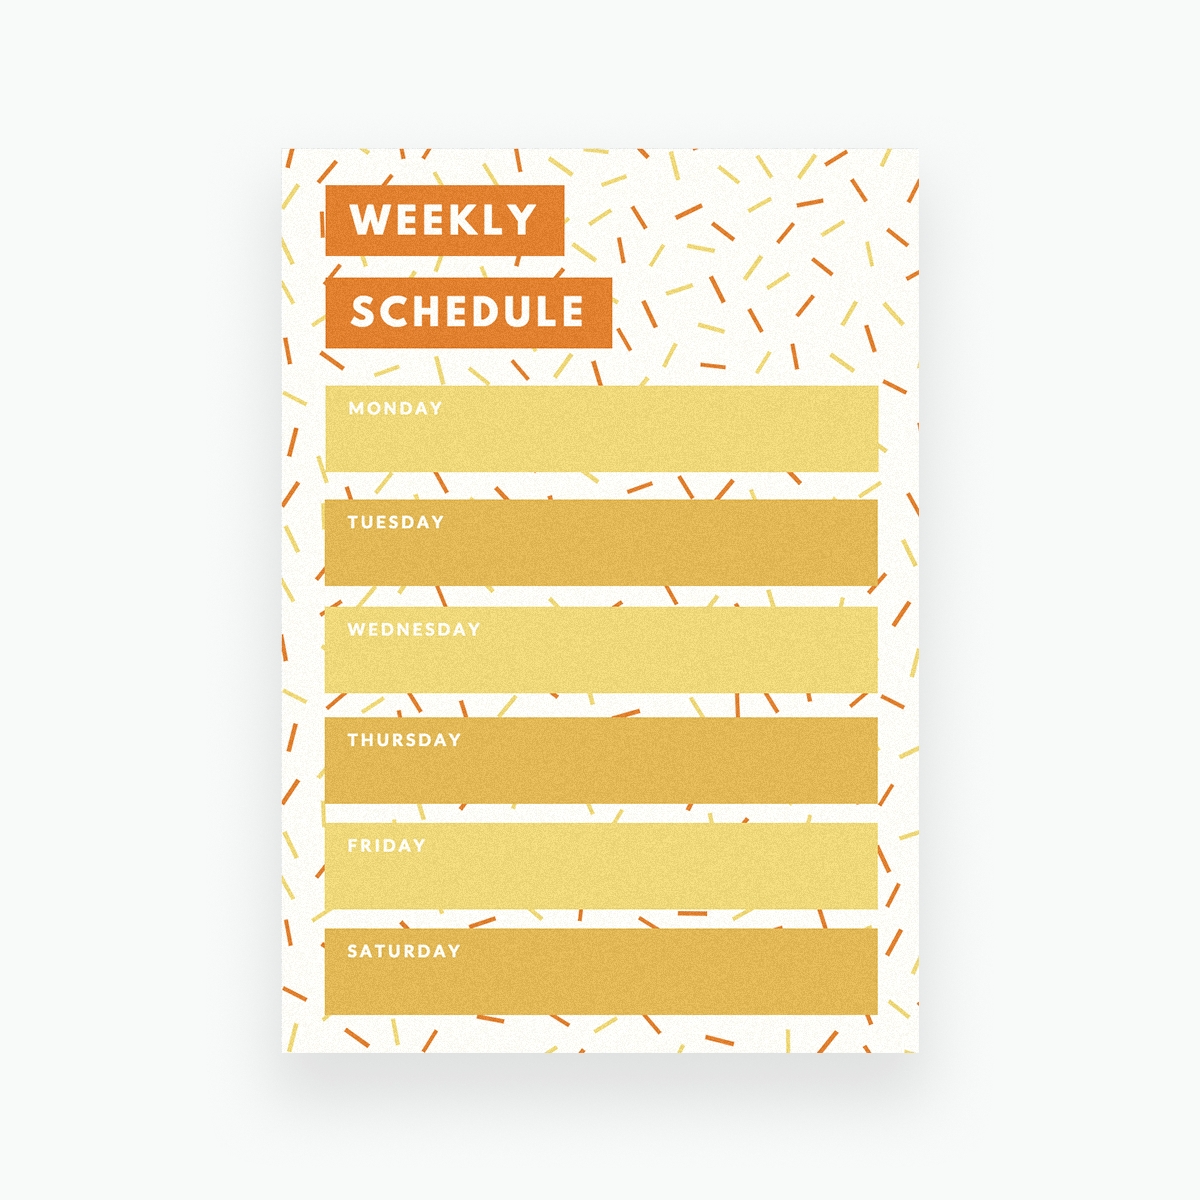 Free Online Weekly Schedule Maker: Design A Custom Weekly Schedule with regard to Schedule At A Glance Template